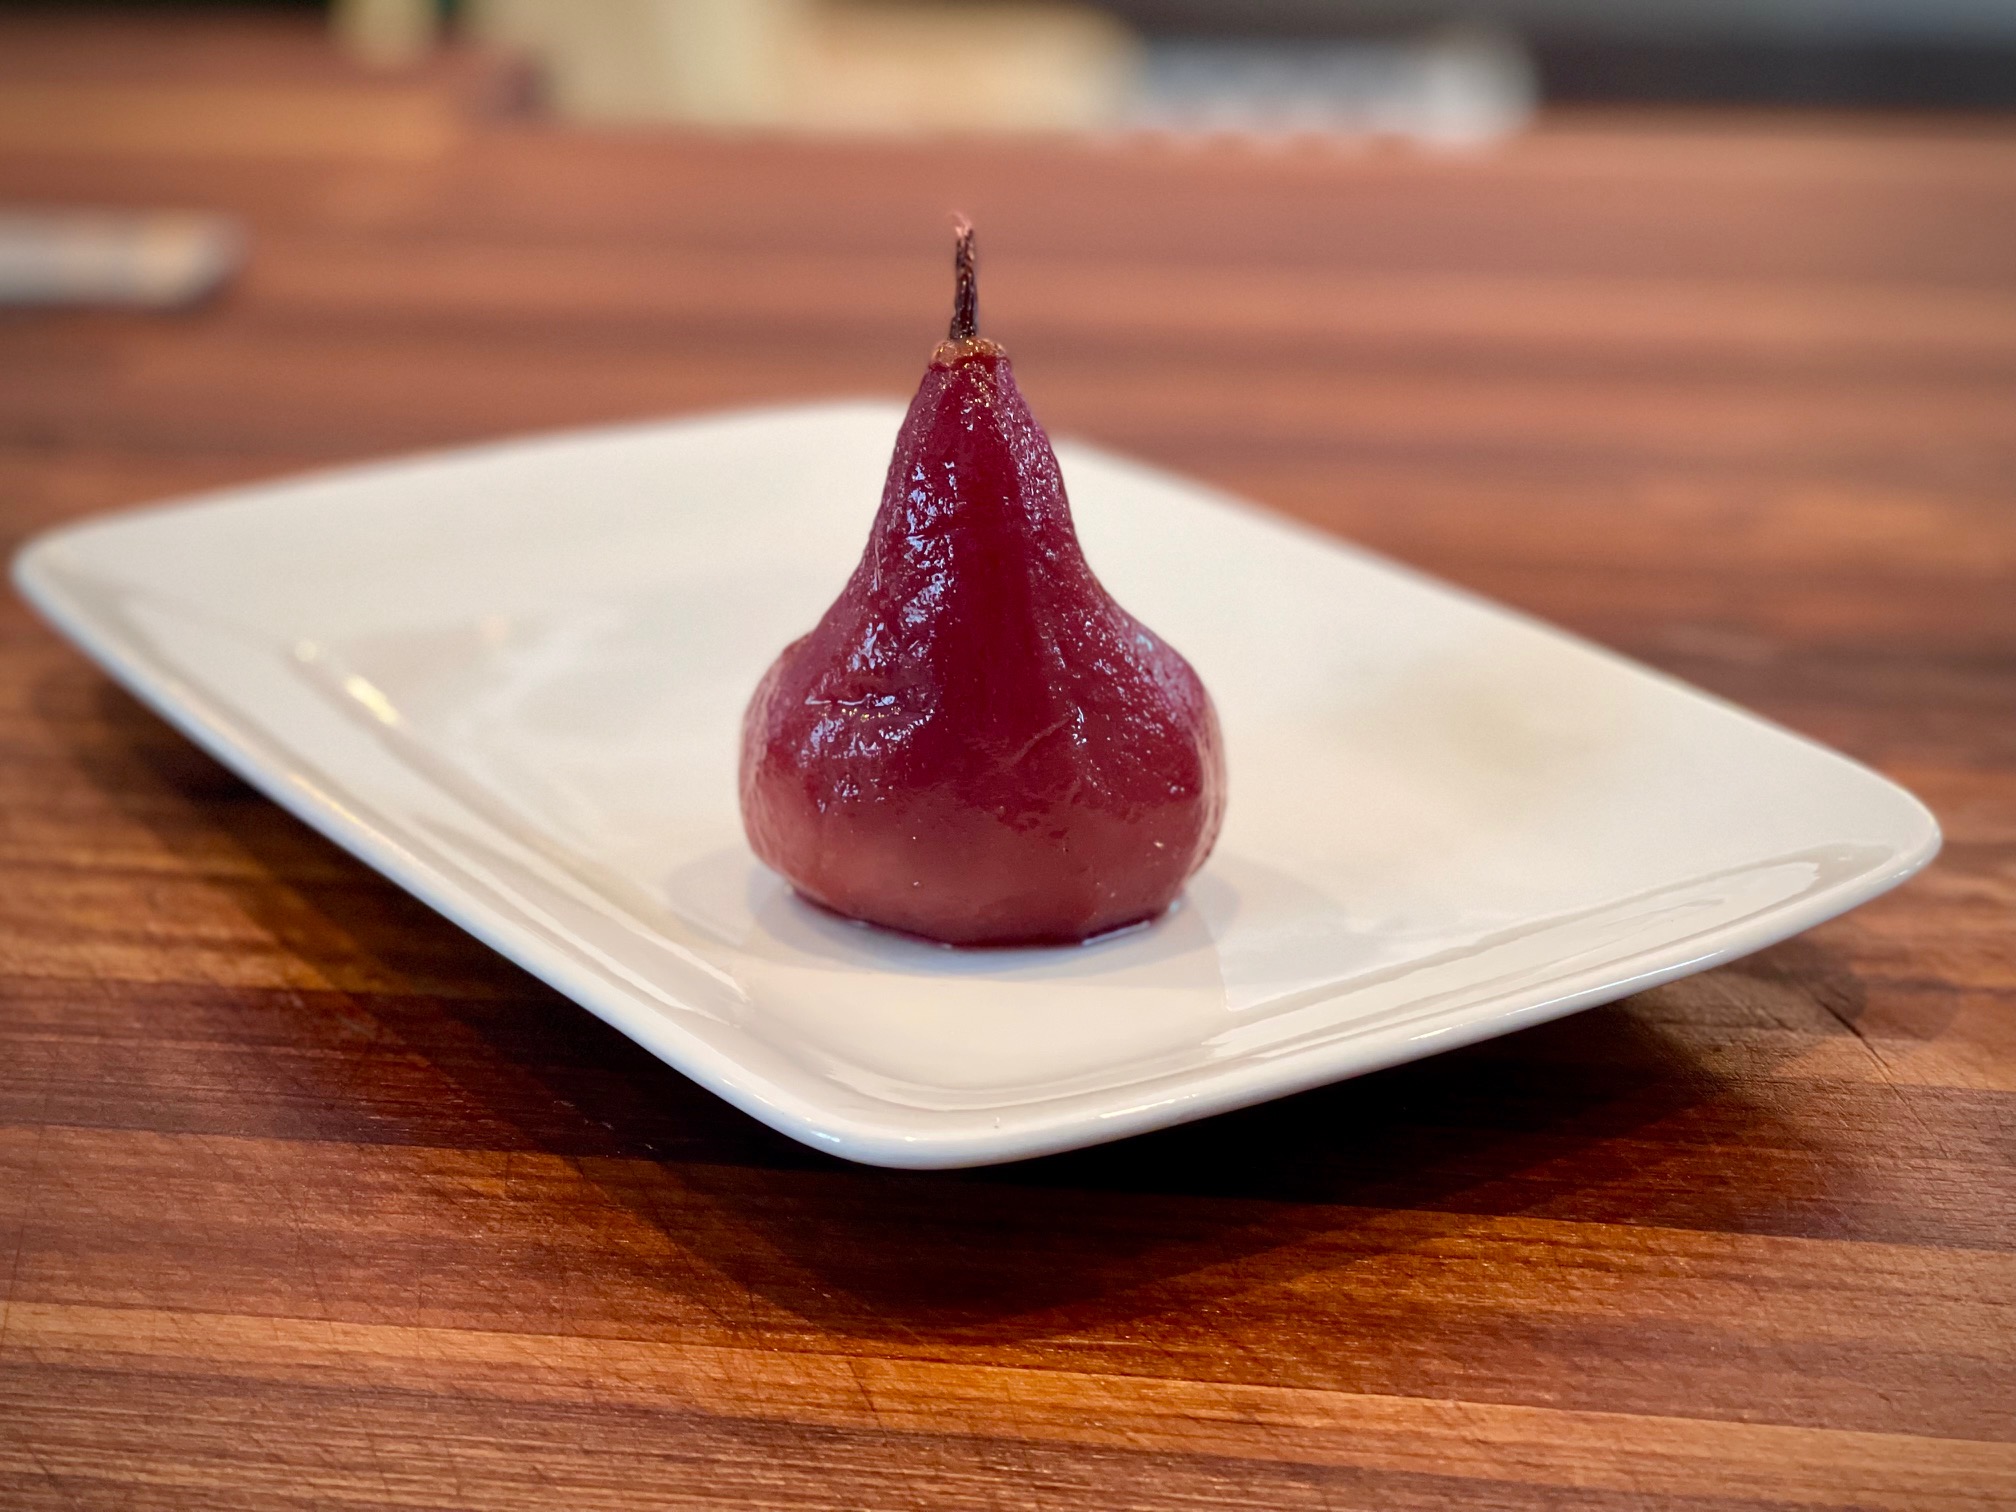 https://334586.fs1.hubspotusercontent-na1.net/hubfs/334586/Blog/SY%20Poached%20Fruit/Perfectly%20Poached%20Pear.jpg